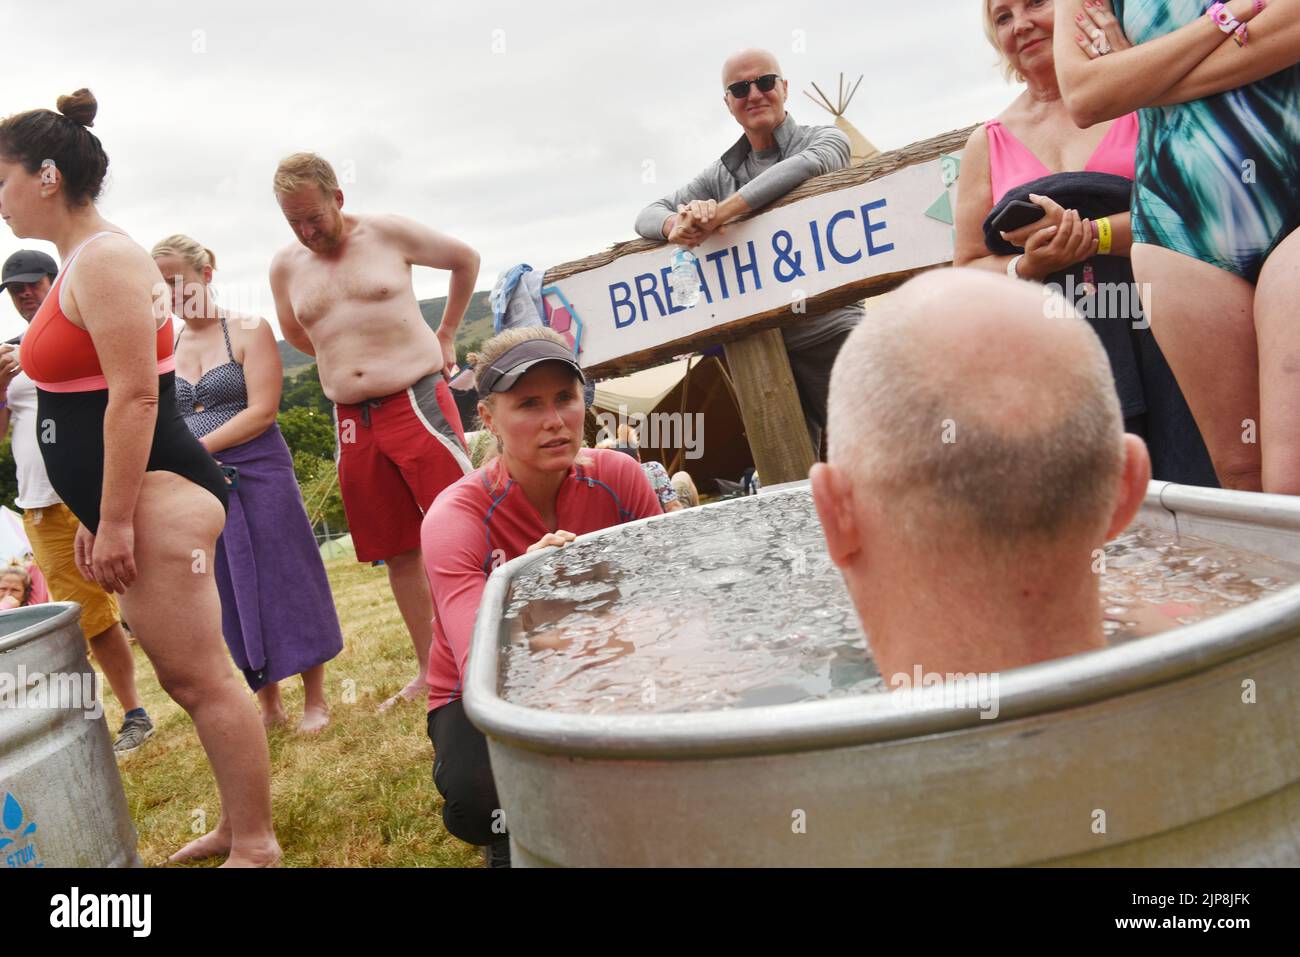 Aodhnait Lombard well being, performance coach and official Wim Hof Method Instructor takes an ice bath session @ family festival Camp Bestival @ Lulworth Castle and Estate, Dorset July 28 - 31 2022 Stock Photo